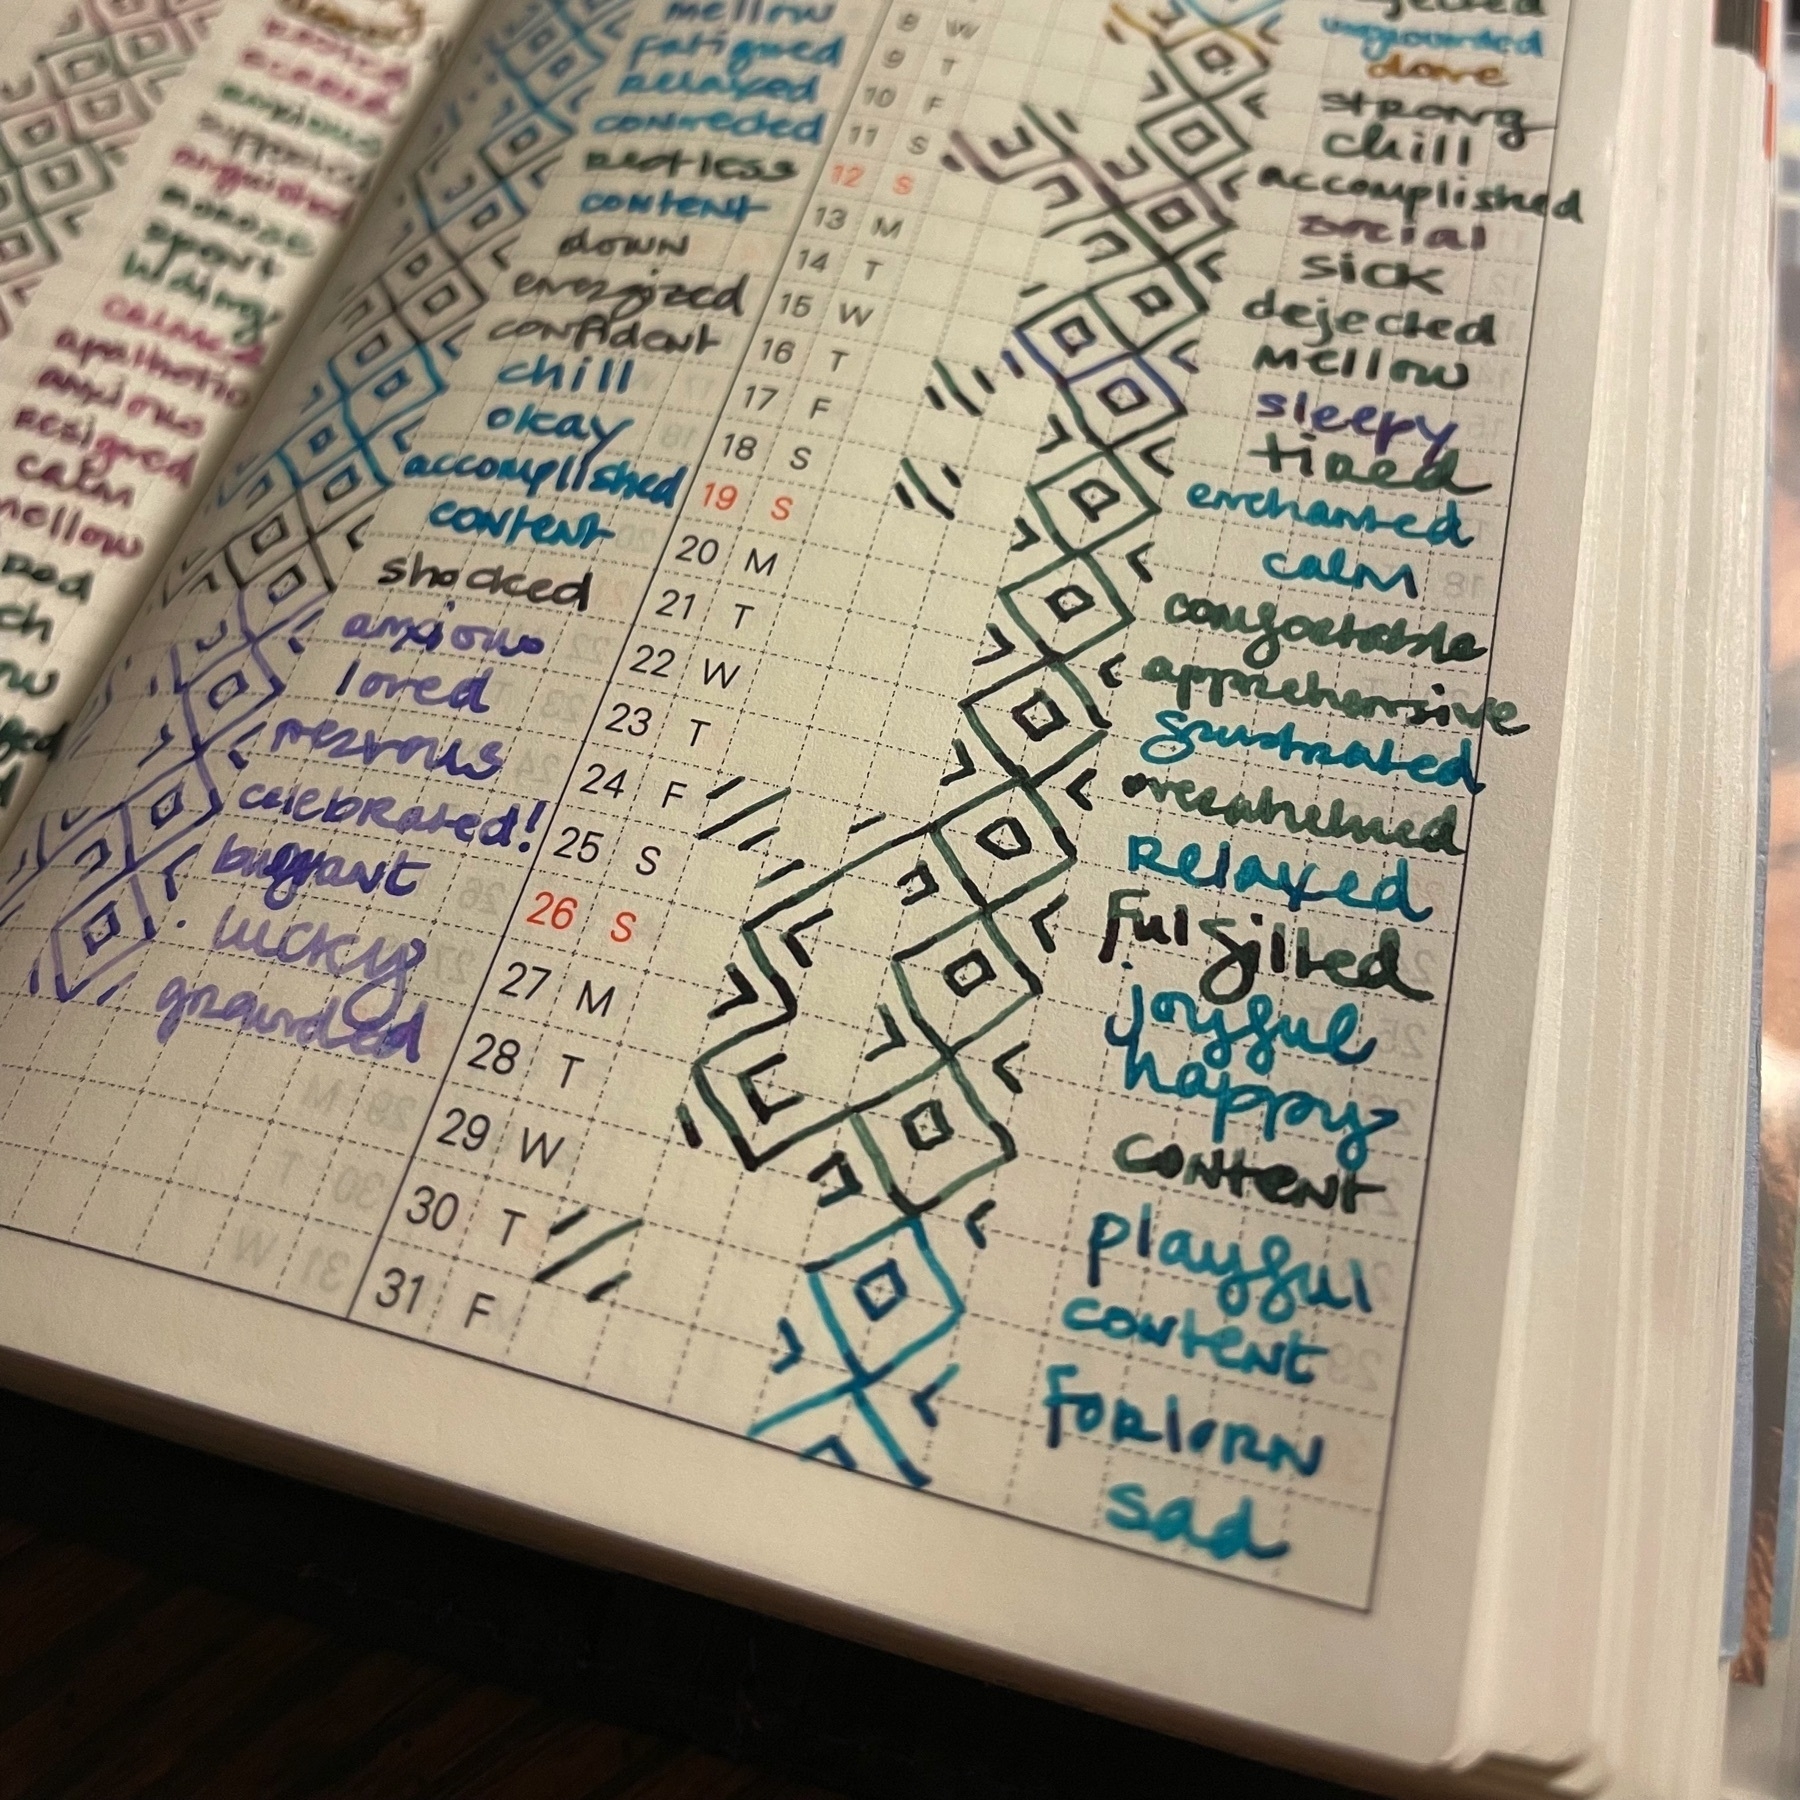 paper planner filled in with lines that form patterns in the planner's grid squares